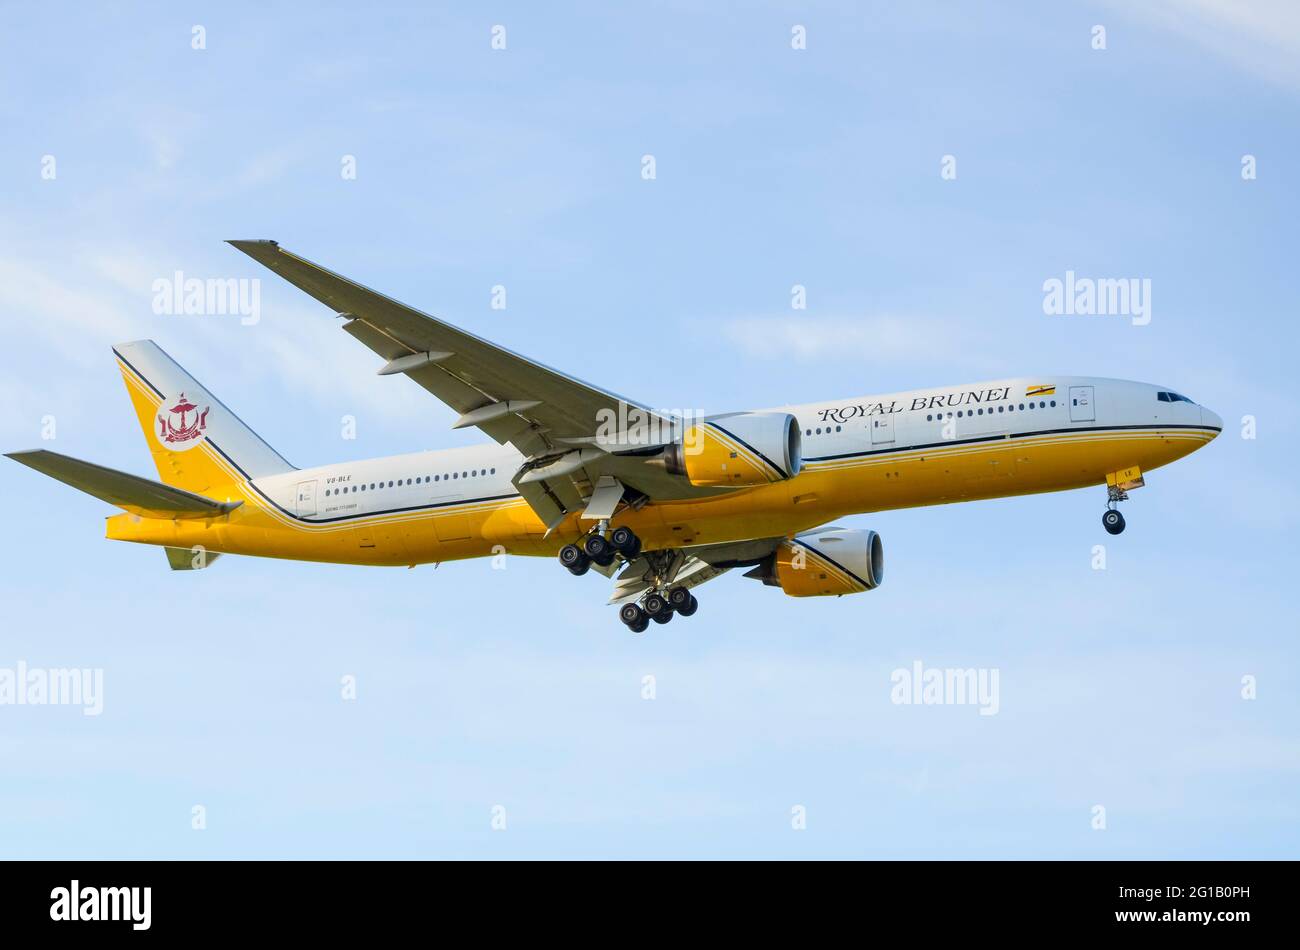 Royal Brunei Airlines Boeing 777 airliner jet plane V8-BLE landing at London Heathrow Airport, UK. National flag carrier airline of Brunei Darussalam Stock Photo